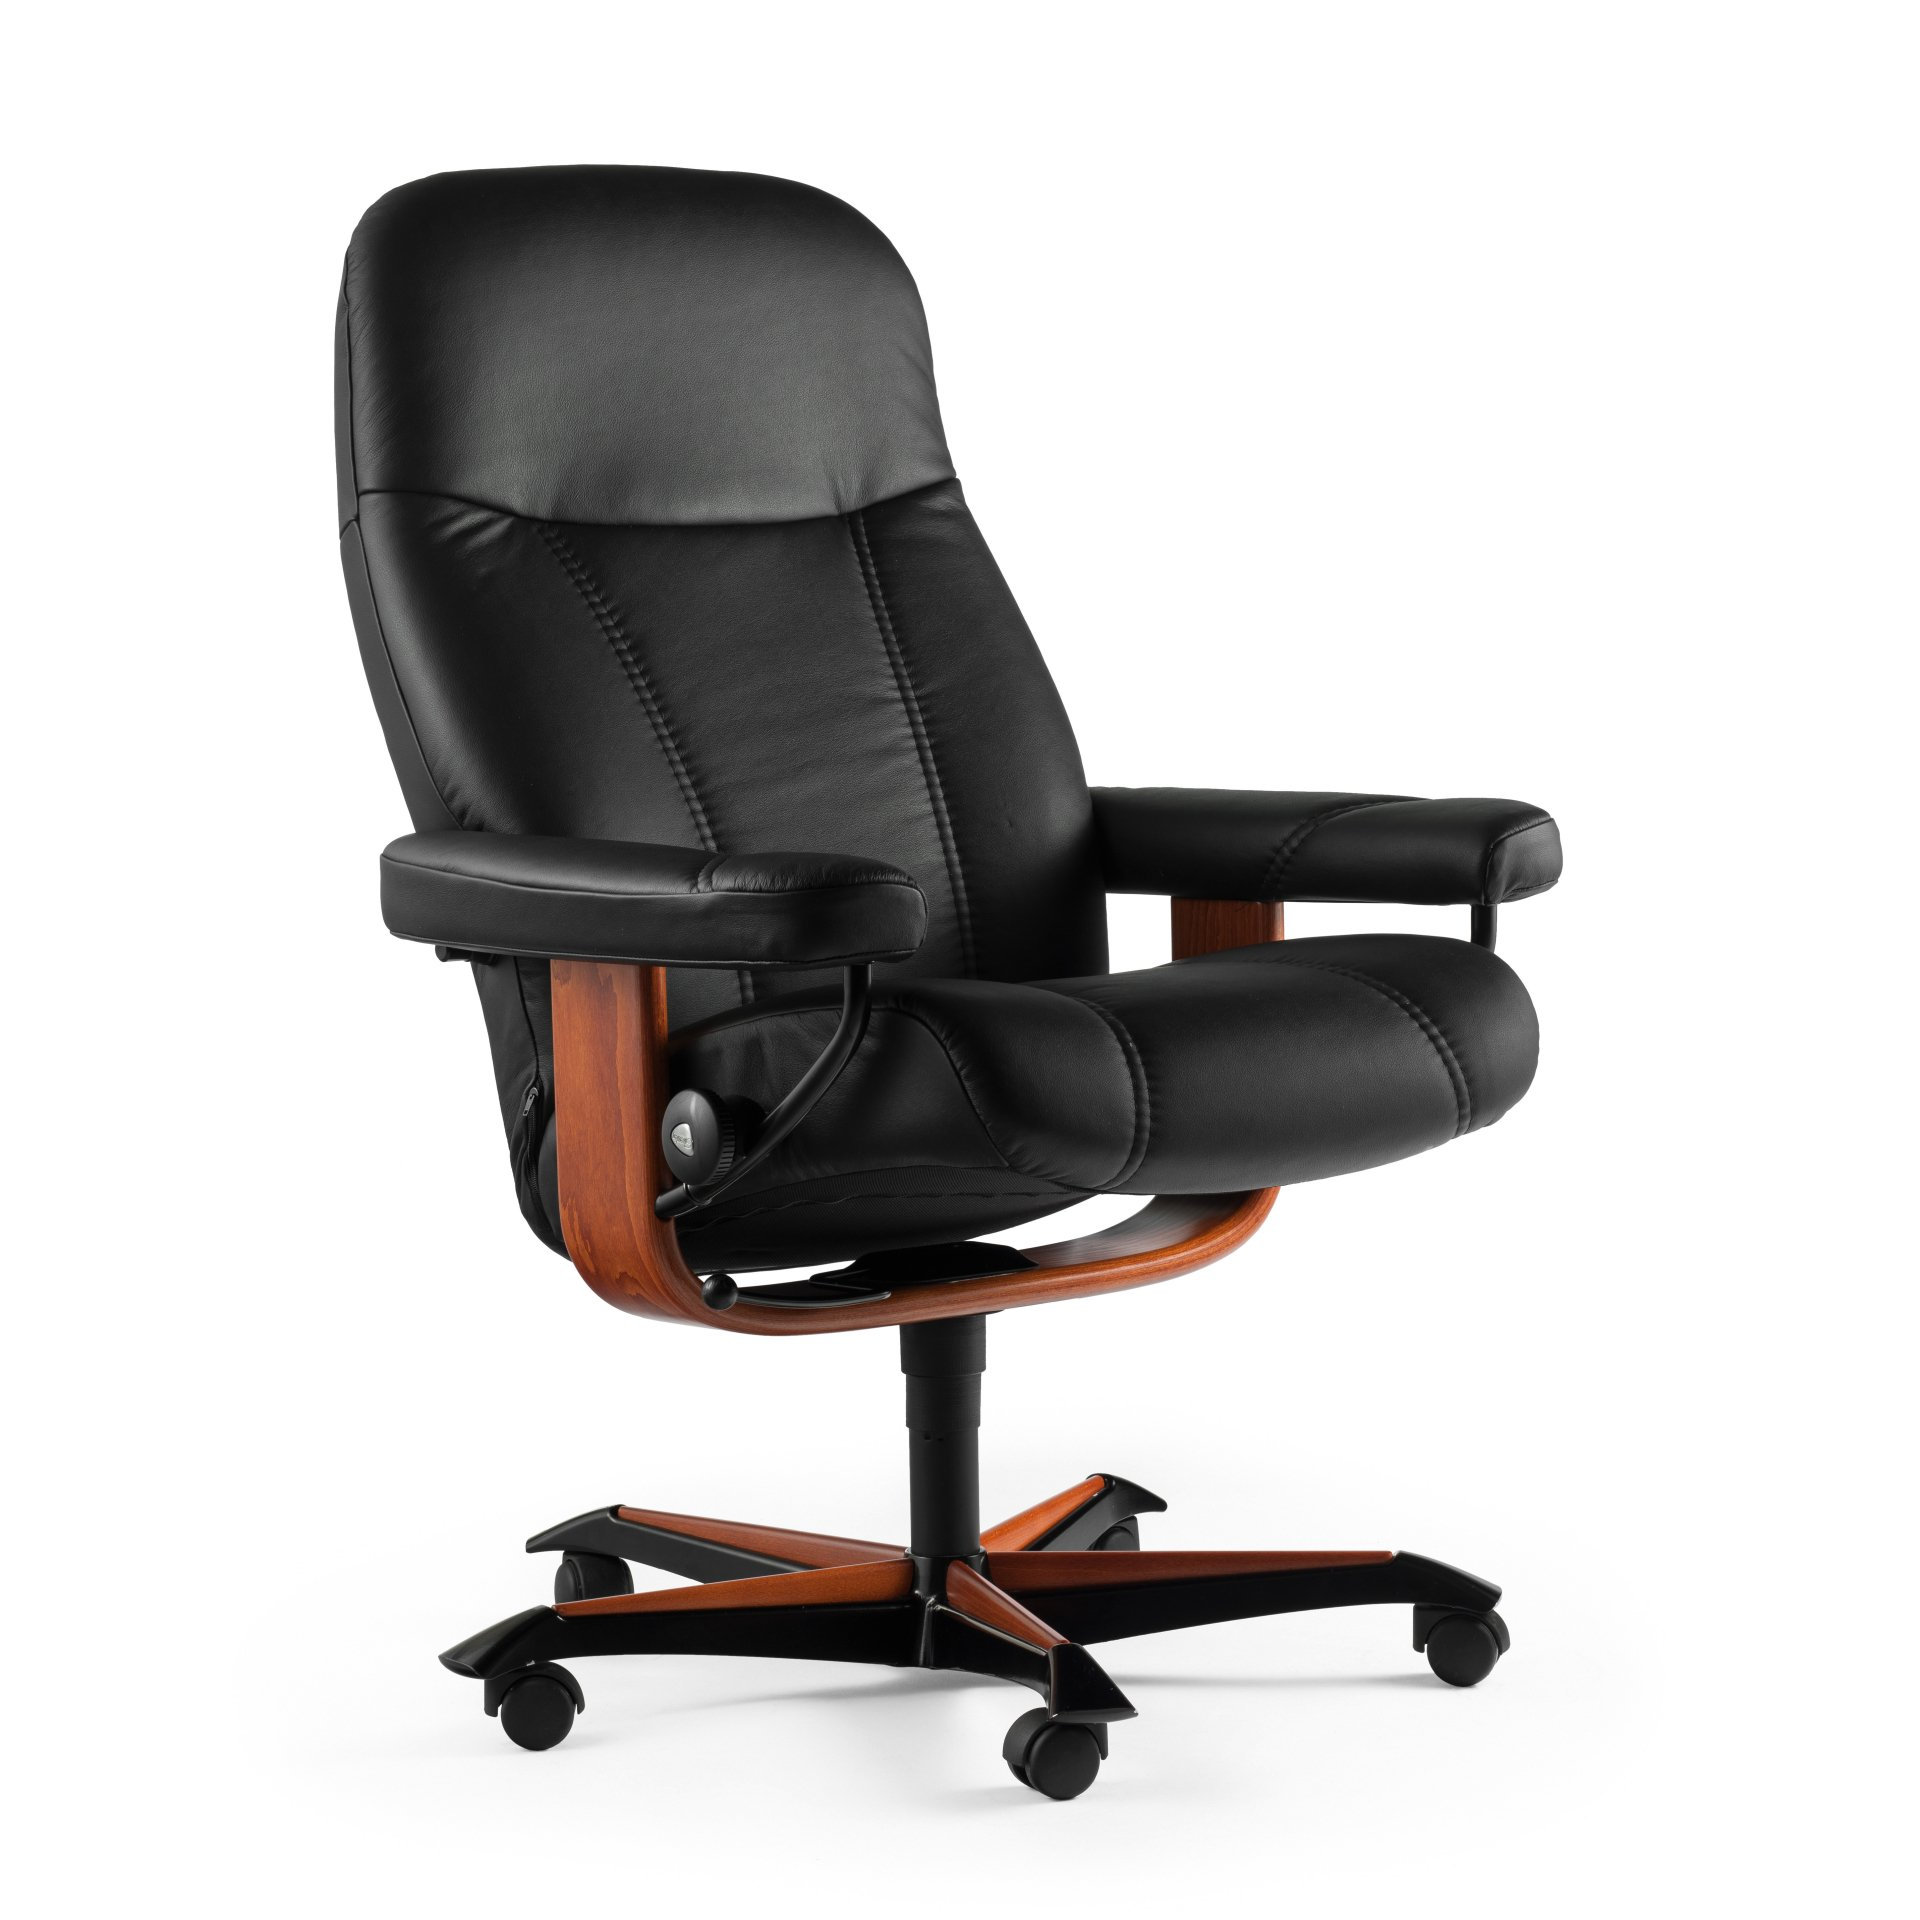 Stressless Consul Executive office chair